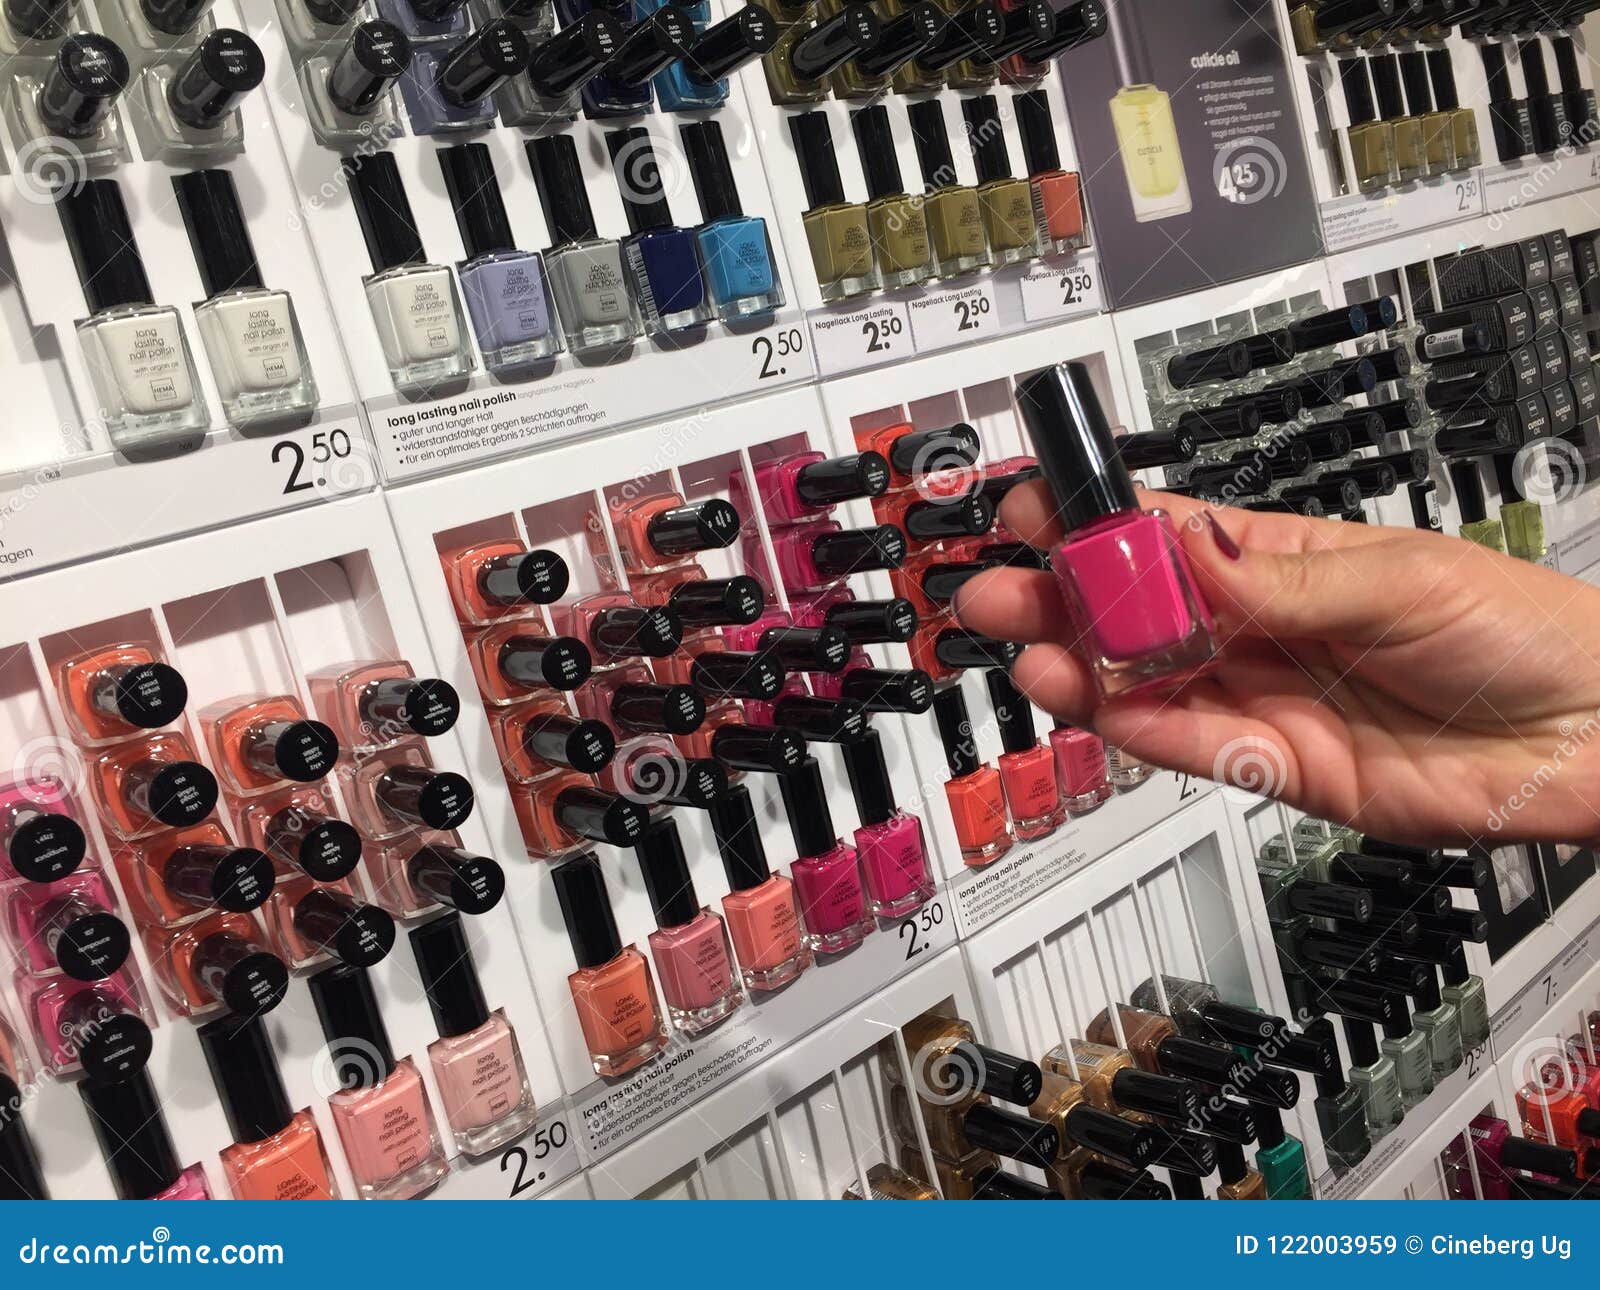 Drug store nail polish: Which is the best? – The Talon